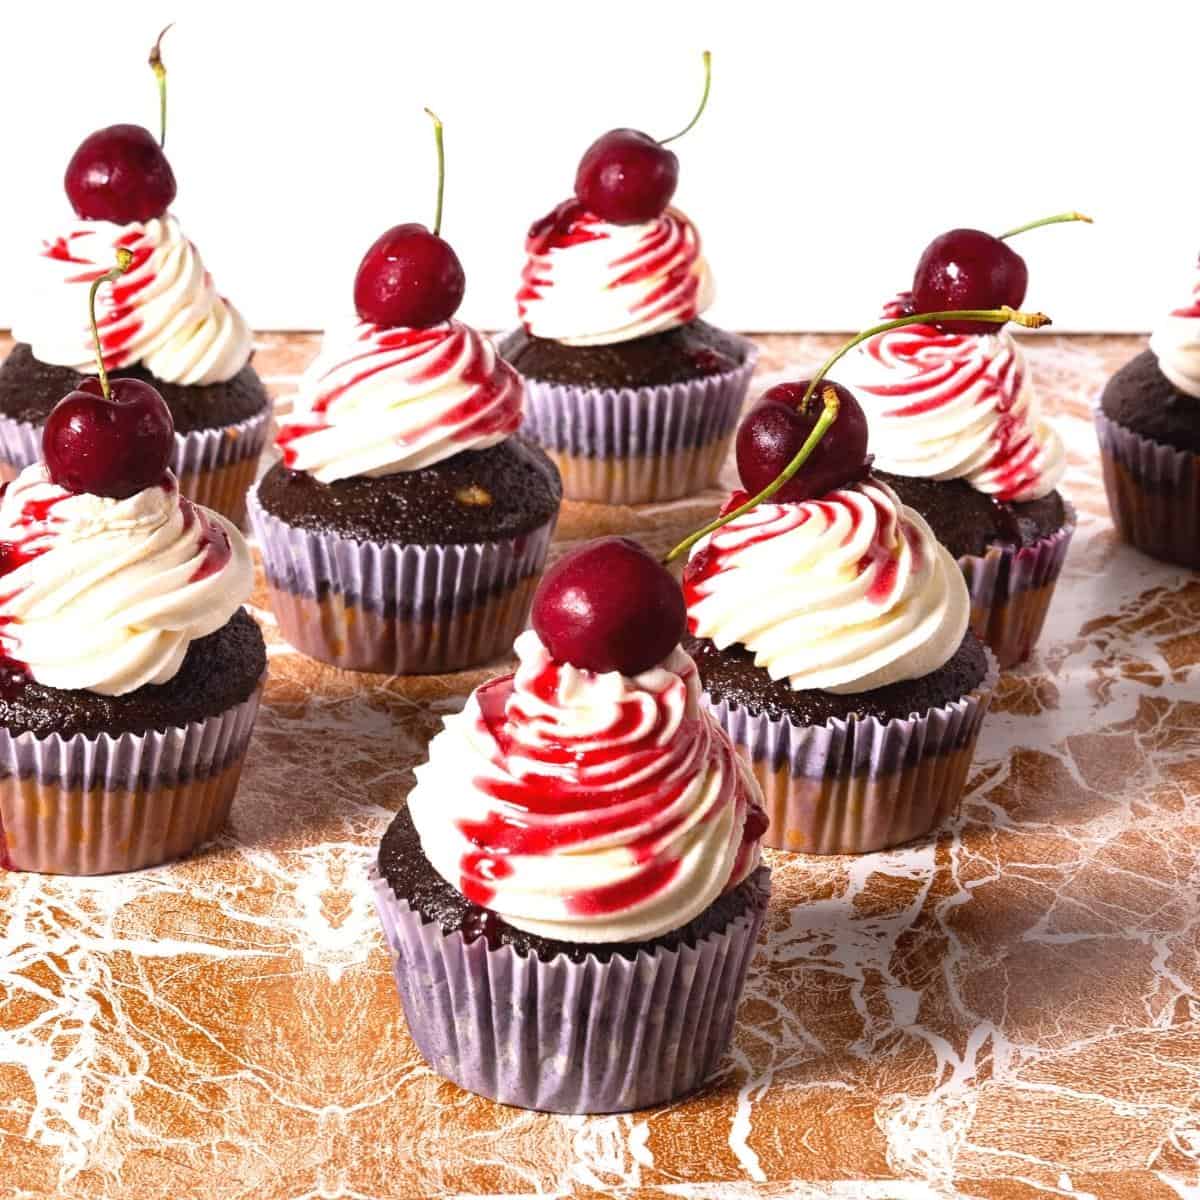 Frosted chocolate cupcake with cherry filling.